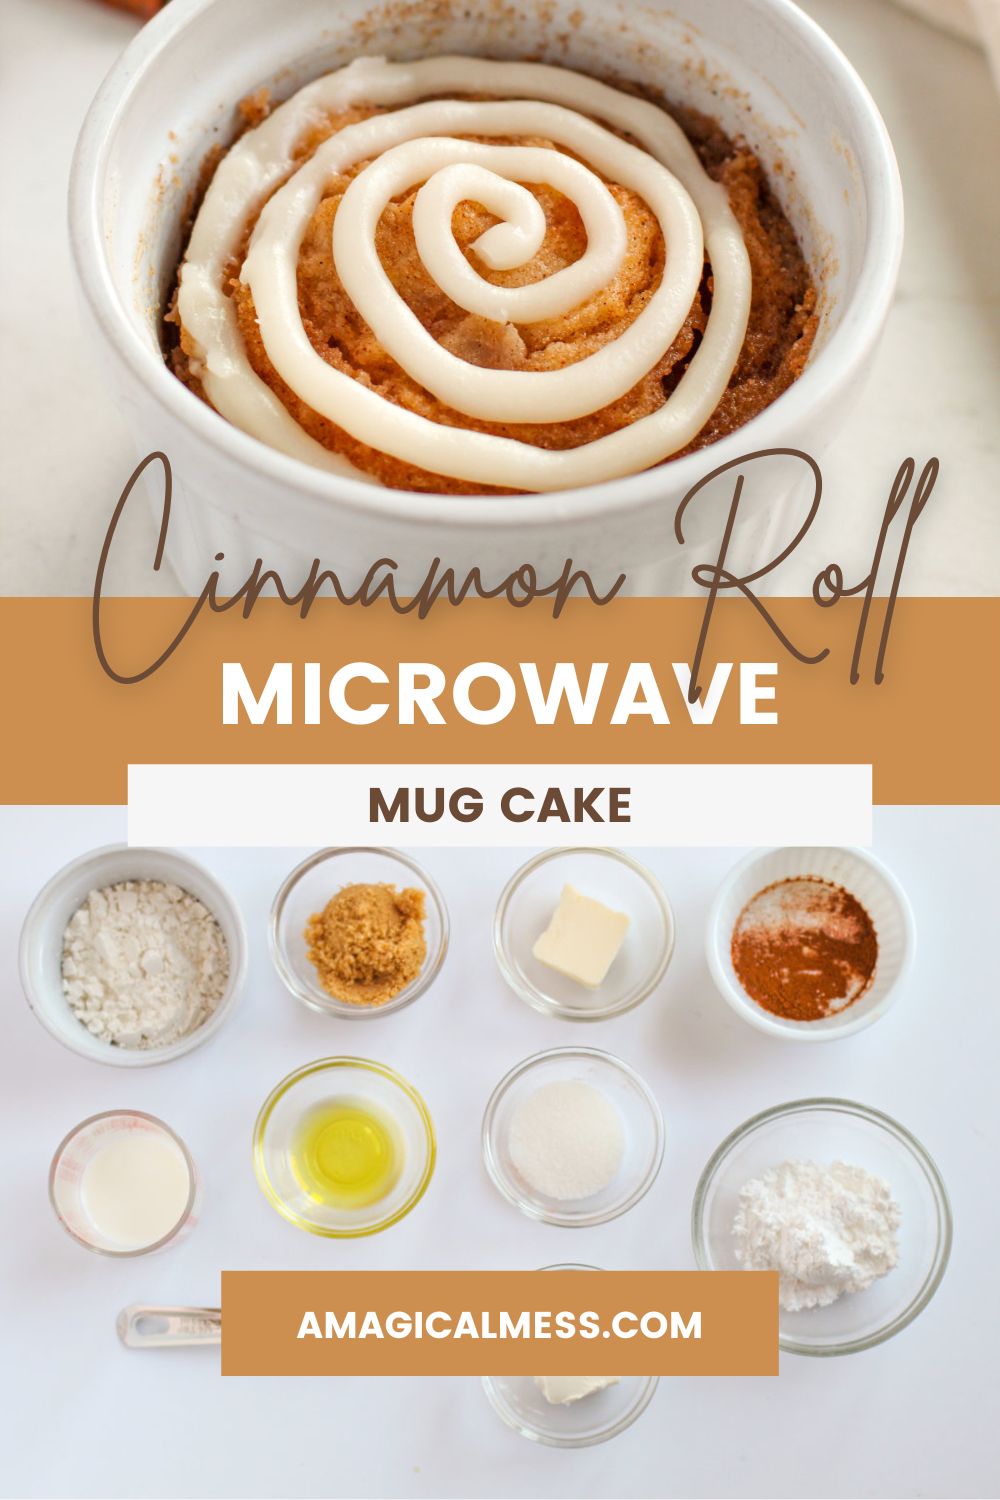 Cinnamon roll cake in a dish and ingredients in bowls under it.